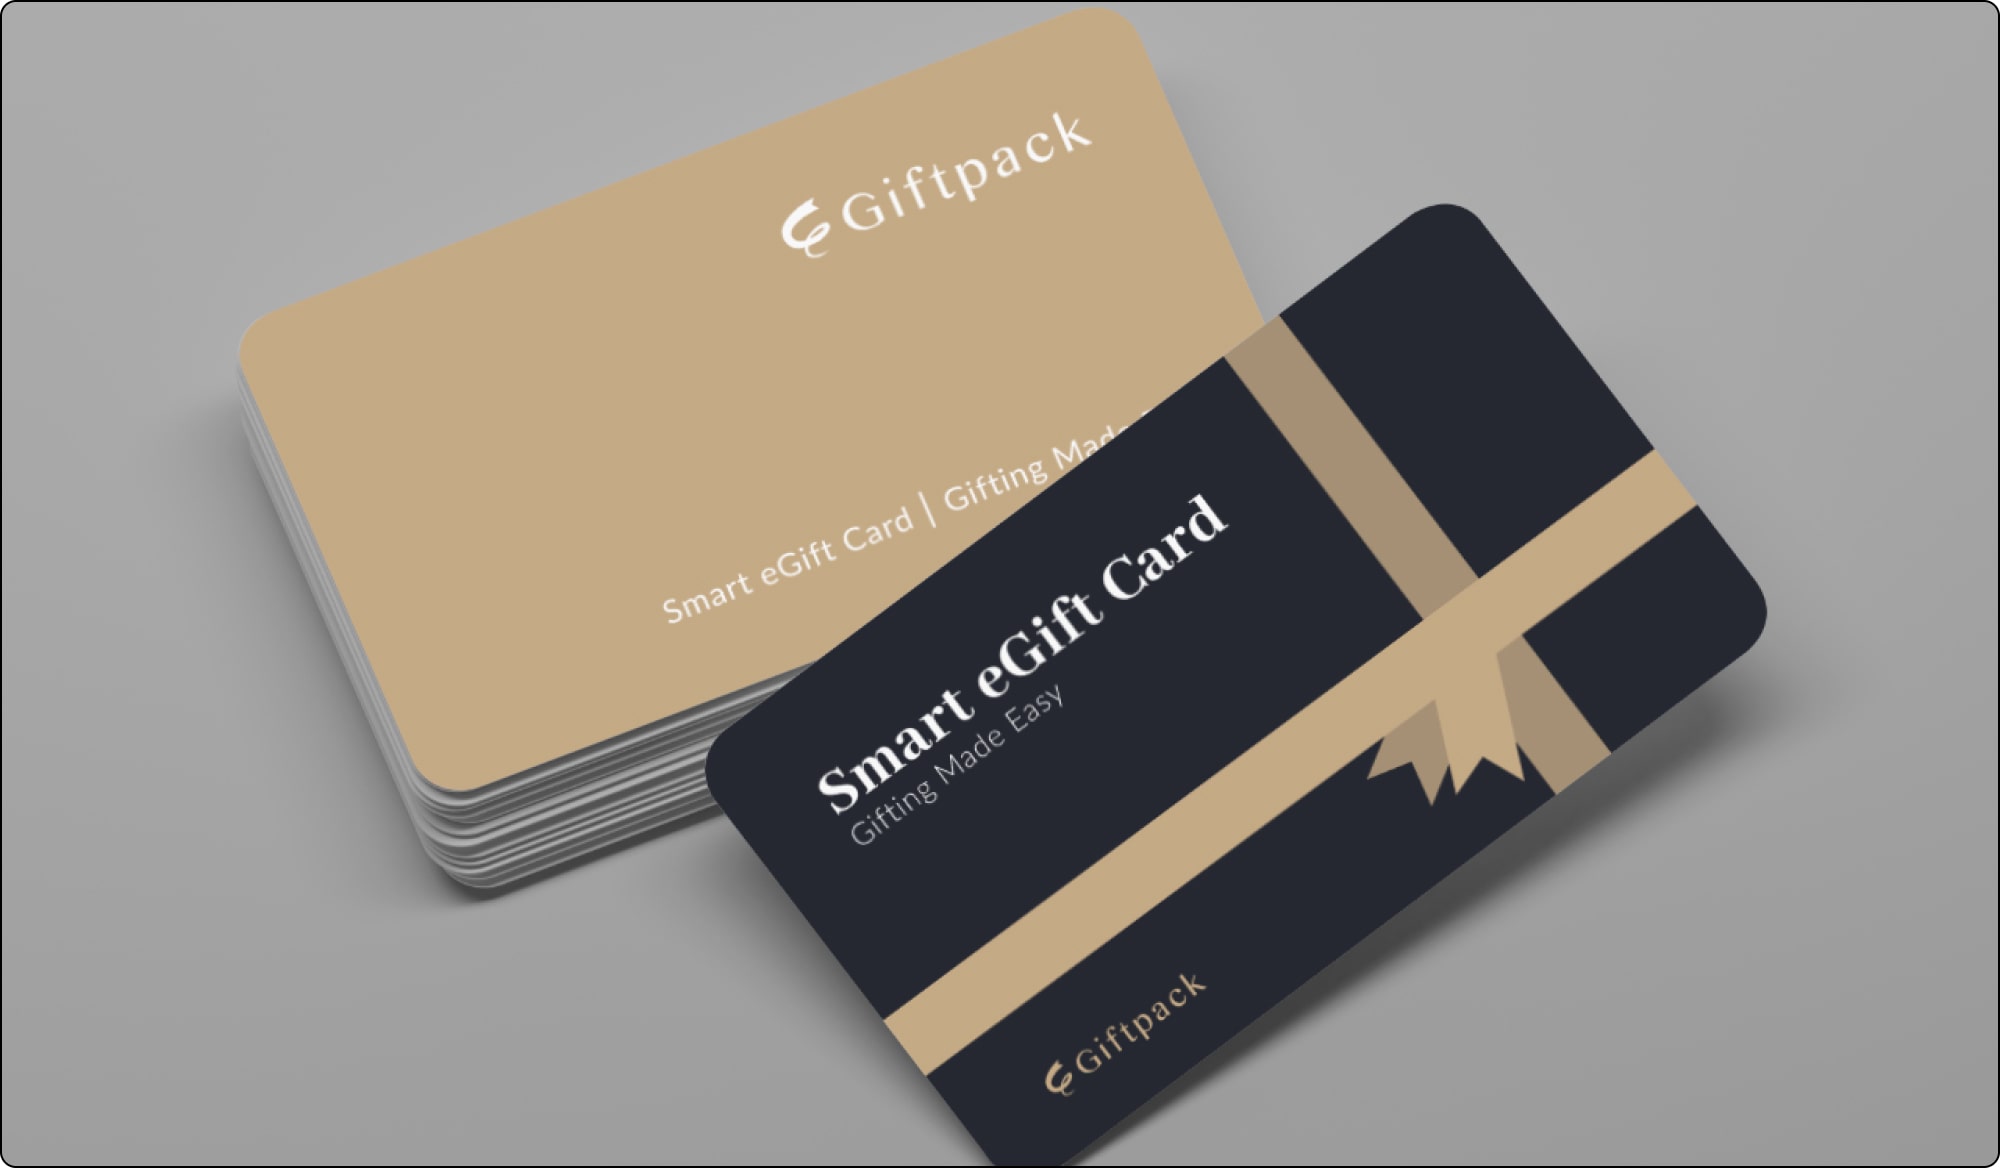 giftpack smart egift card for 350 brands for best employee appreciation gifts